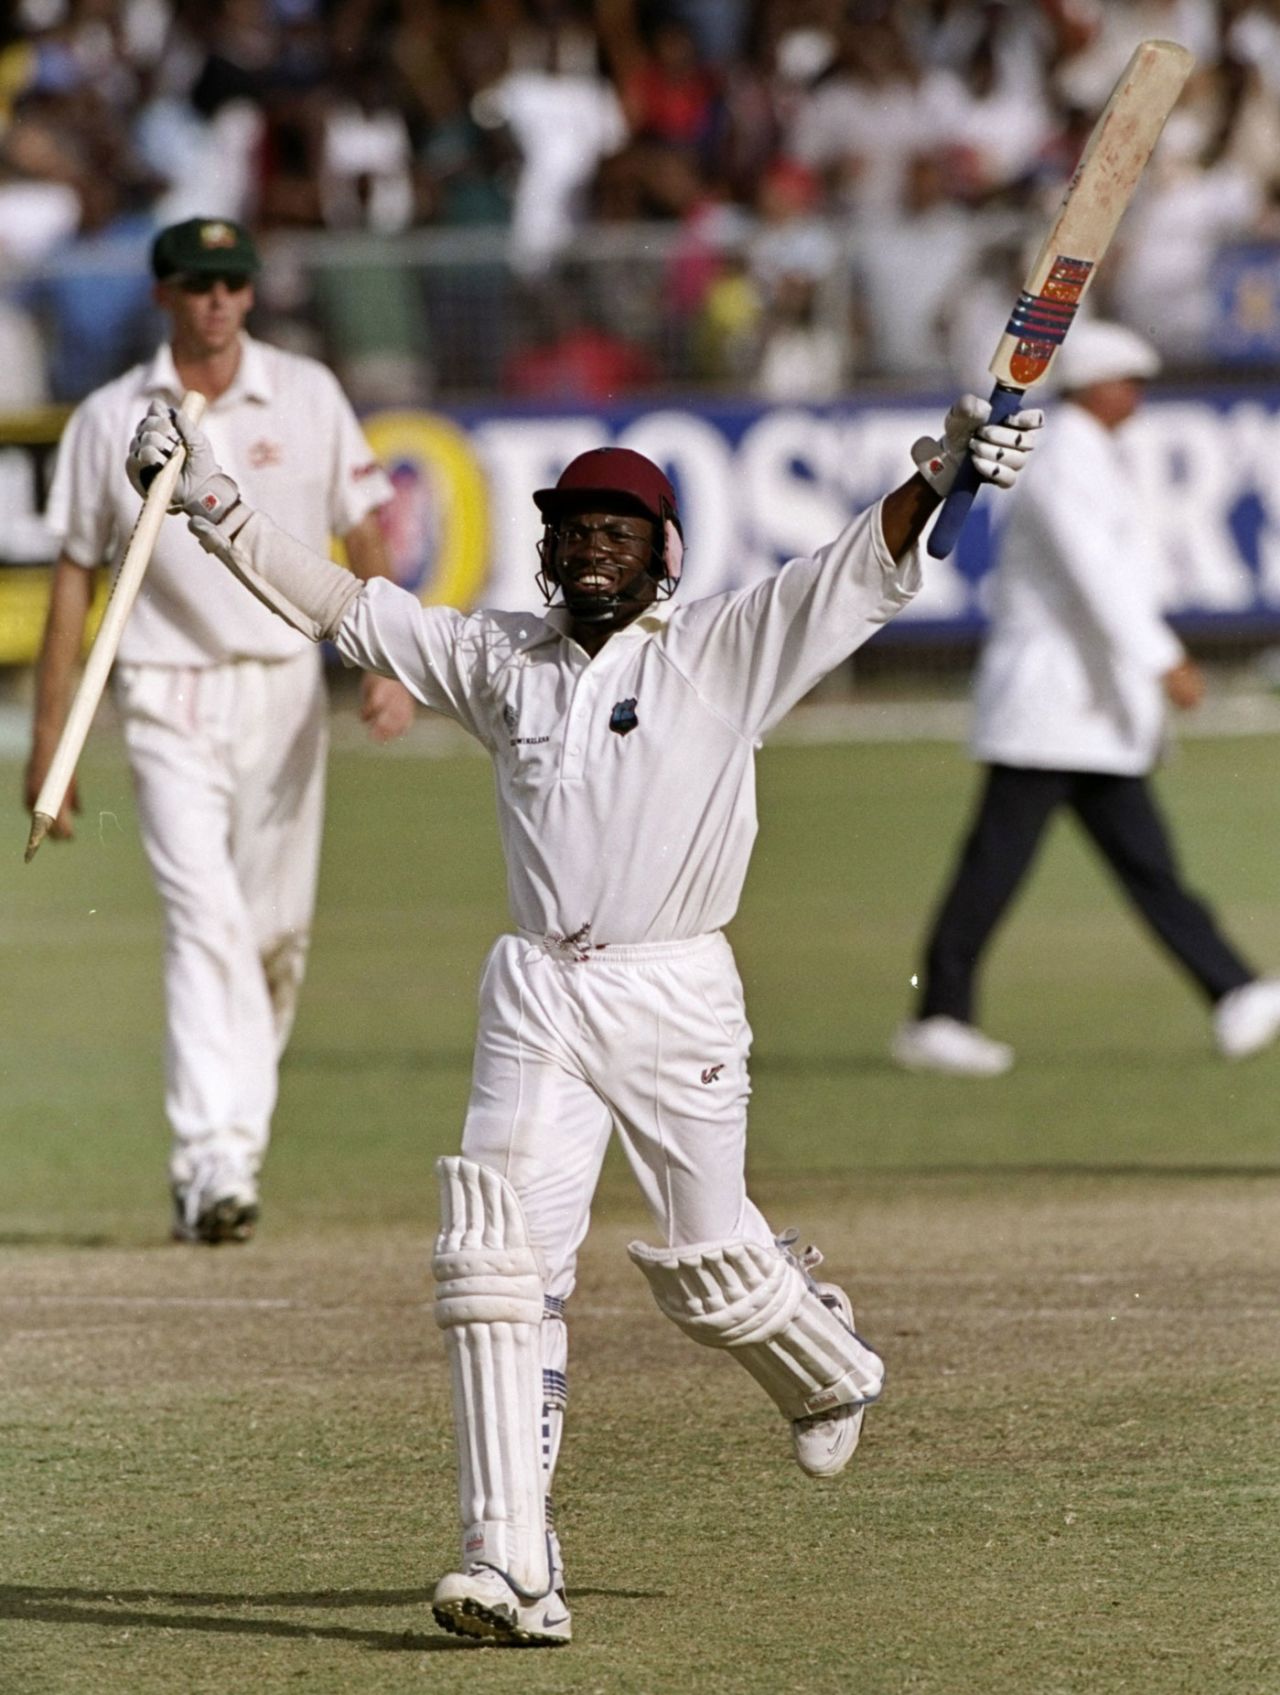 Yet another special innings from Brian Lara, his innings of 153 not out taking his team to victory, West Indies v Australia, 3rd Test, Barbados, 5th day, March 30, 1999